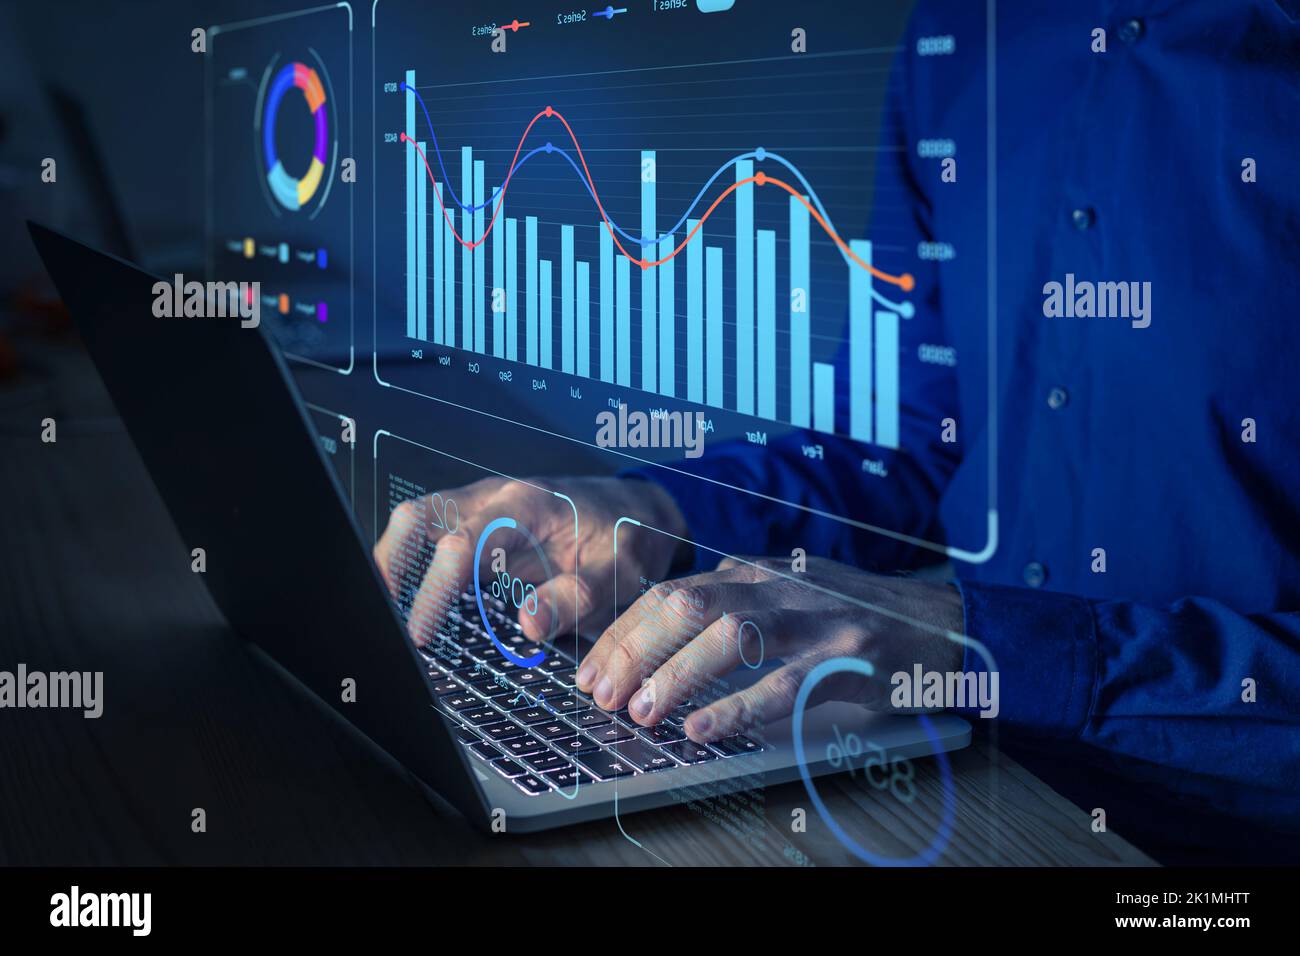 Data analyst working on business analytics dashboard with charts, metrics and KPI to analyze performance and create insight reports for operations man Stock Photo